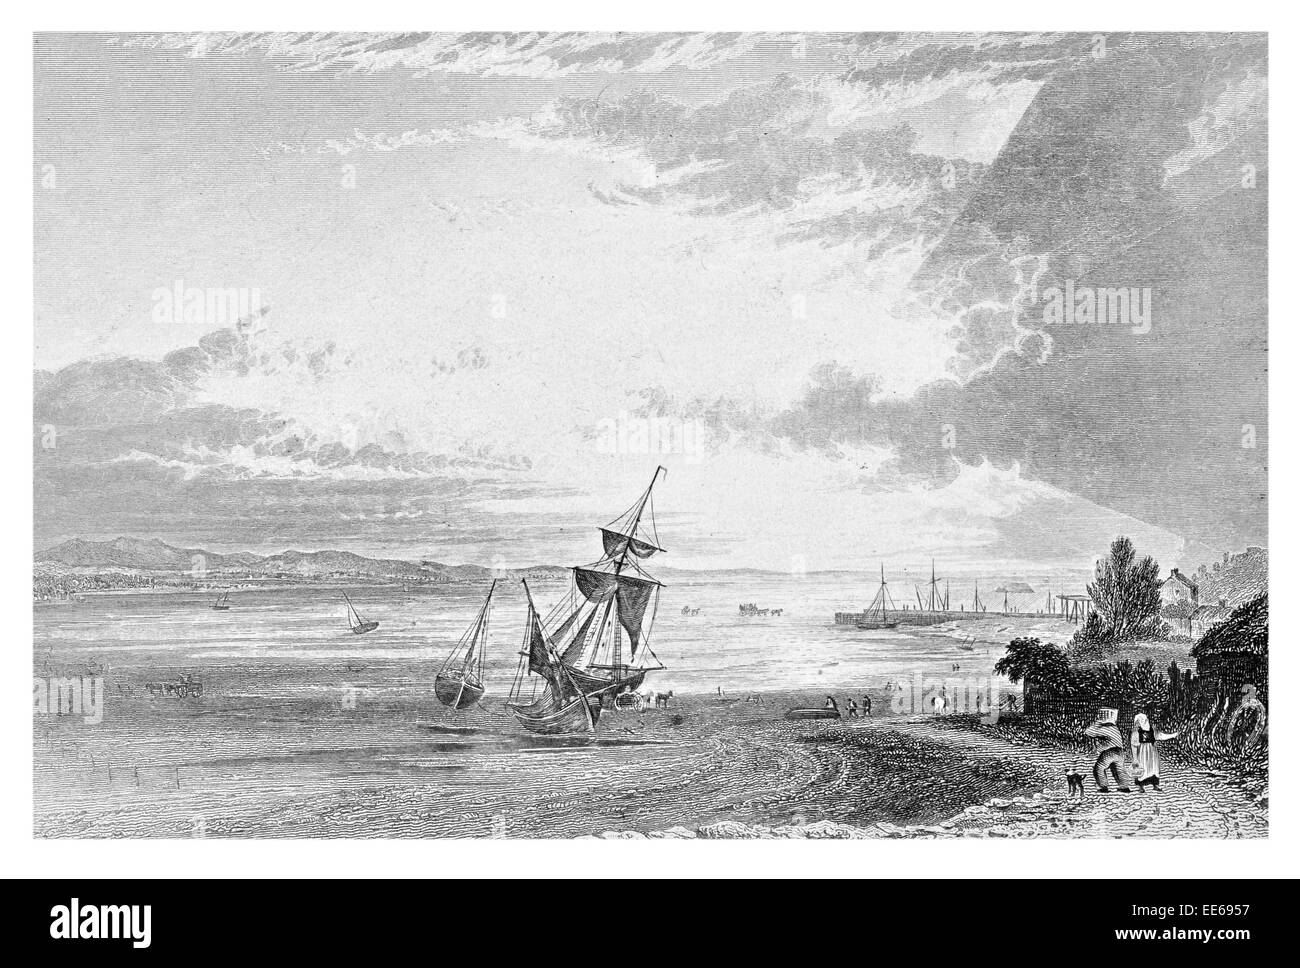 Ulverstone sands ship beach sailing boat fishing vessel beached  Cumbria North West England Lancashire North West England 1879 Stock Photo